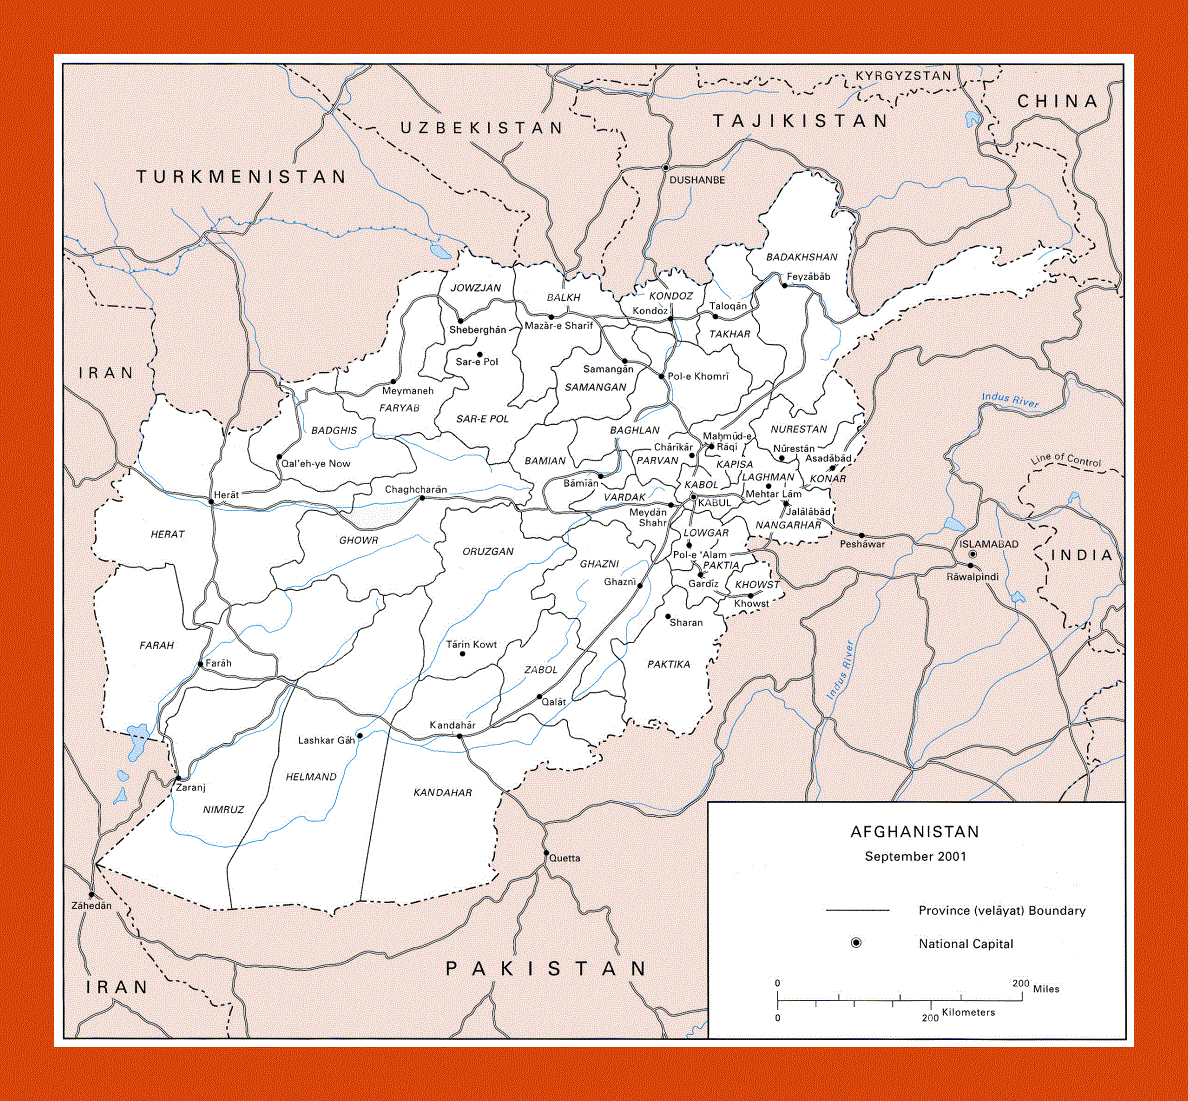 US army map of Afghanistan - 2001